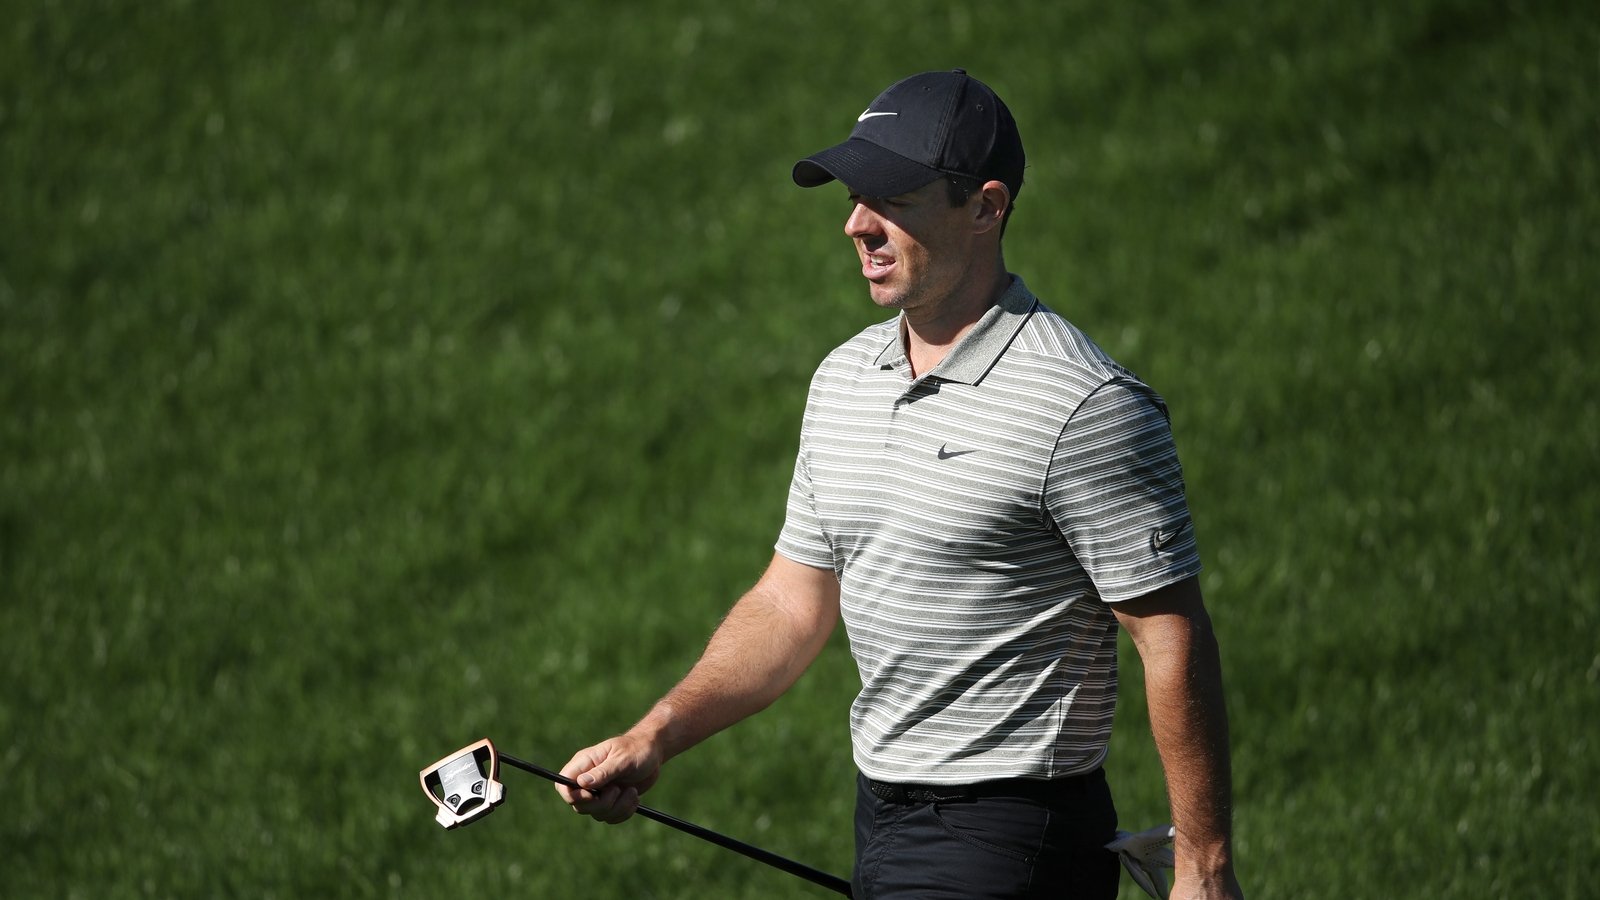 Seven shots by leader Henley after 66 in Vegas McIlroy

